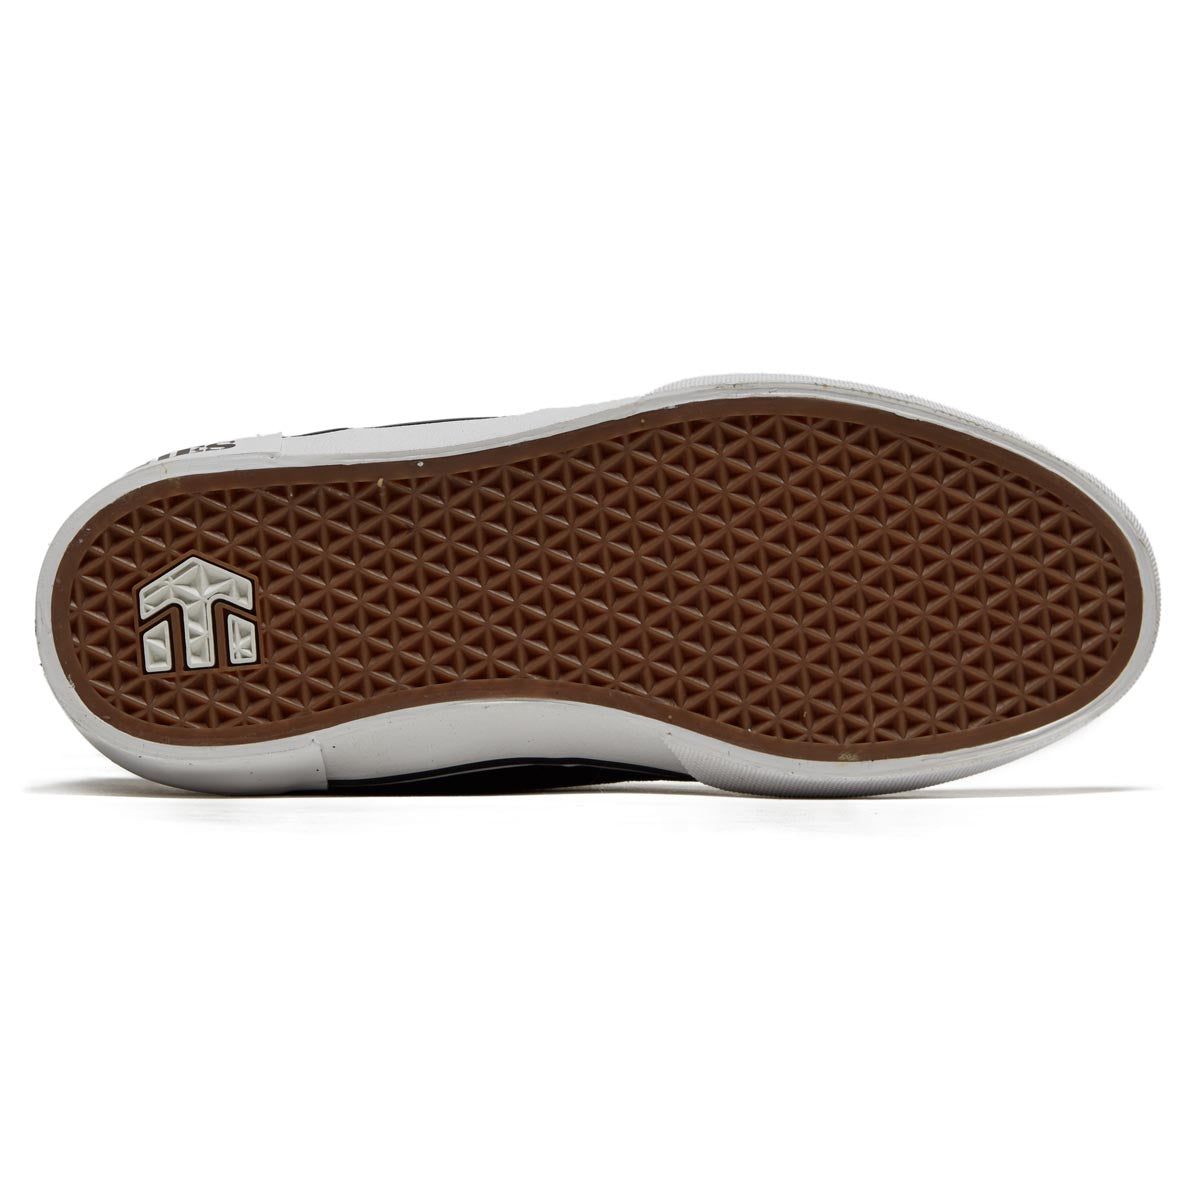 Etnies Andy Anderson Shoes - Black/White image 4